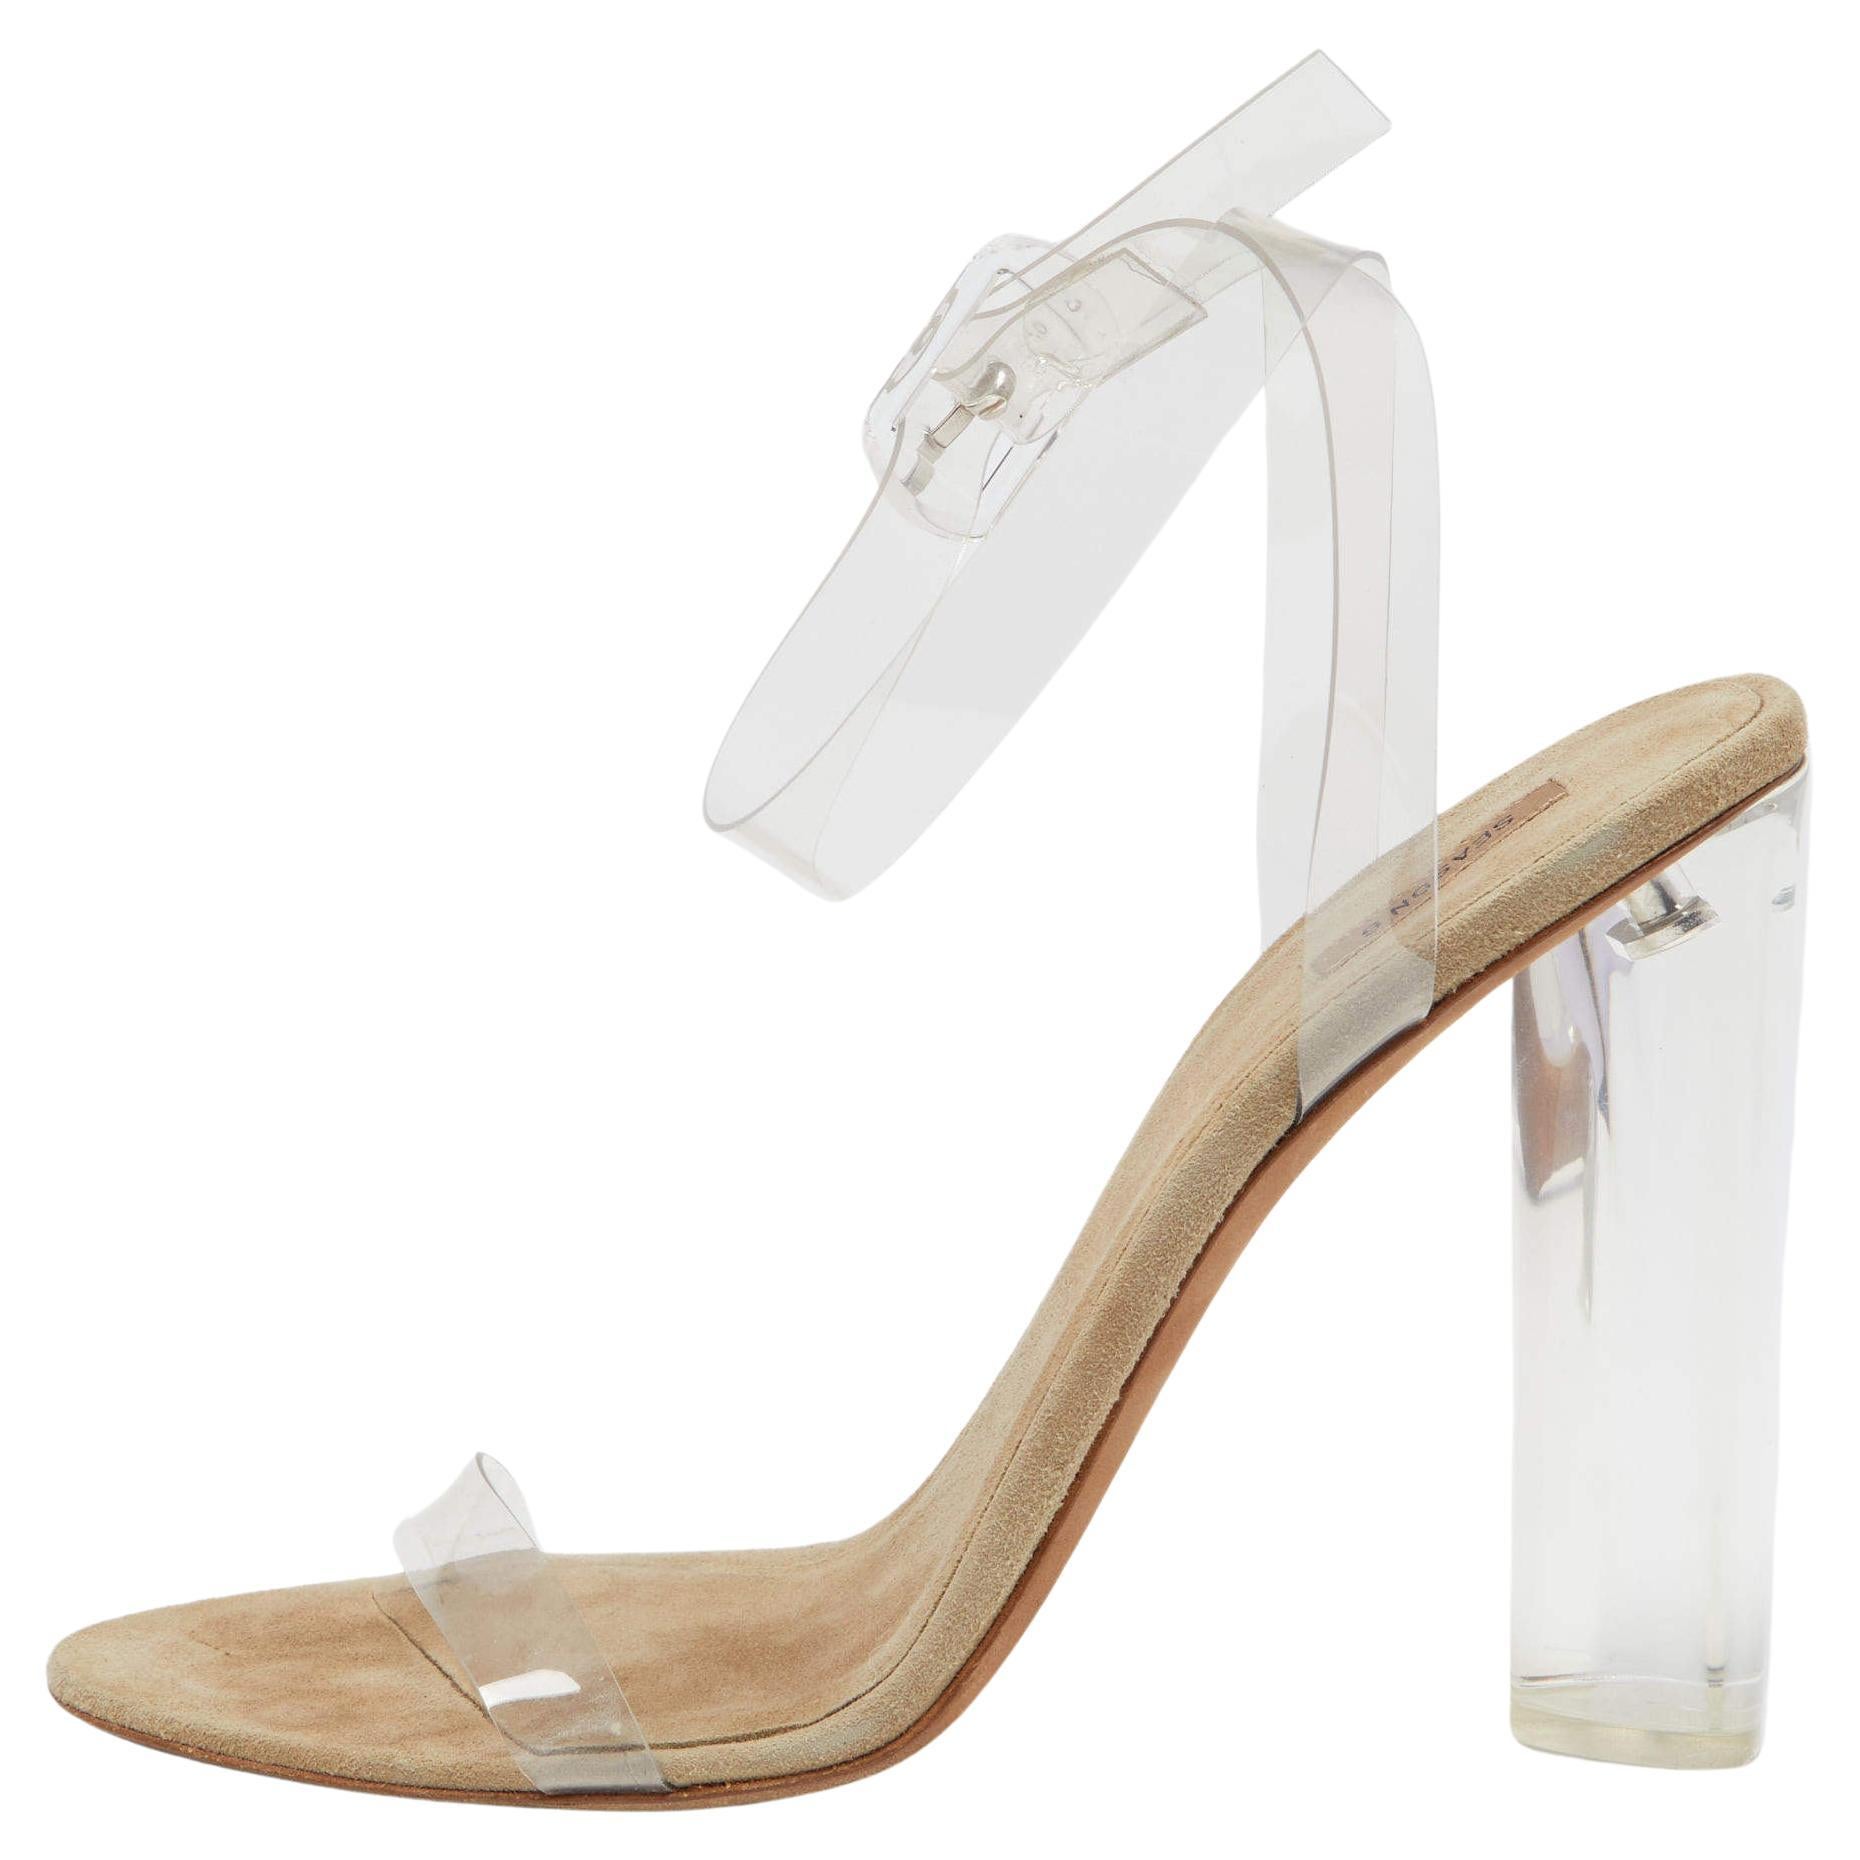 Season 6 White And Grey PVC Open Toe Ankle Strap Sandals Size 40 For Sale